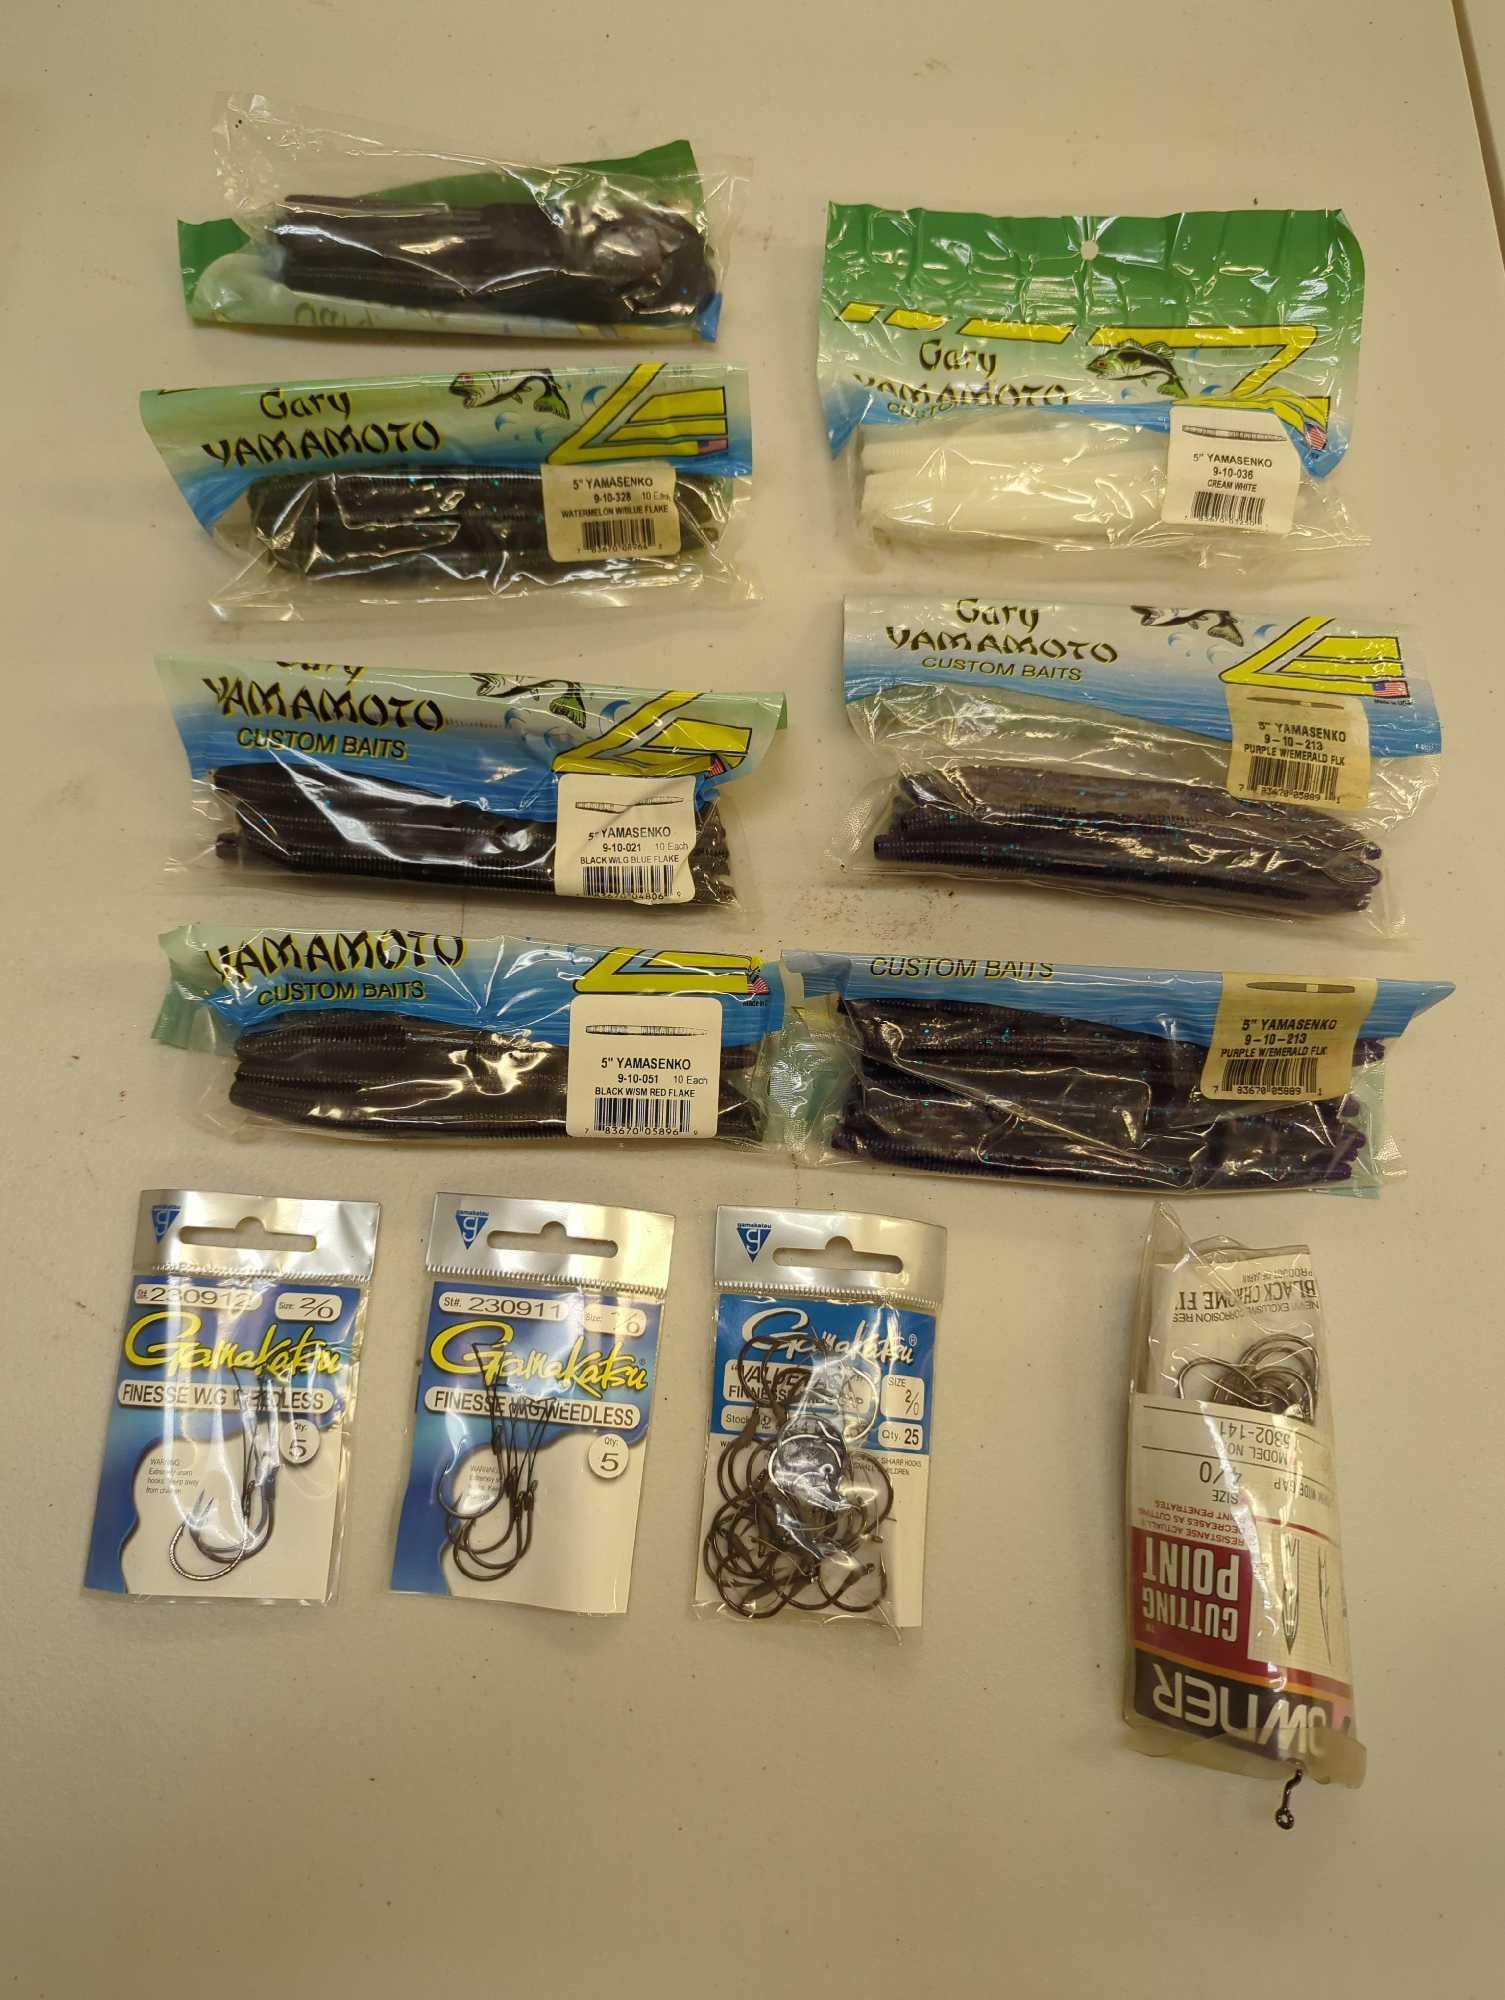 Tackle Box and contents including various worms and other various fishing lures. Comes as is shown